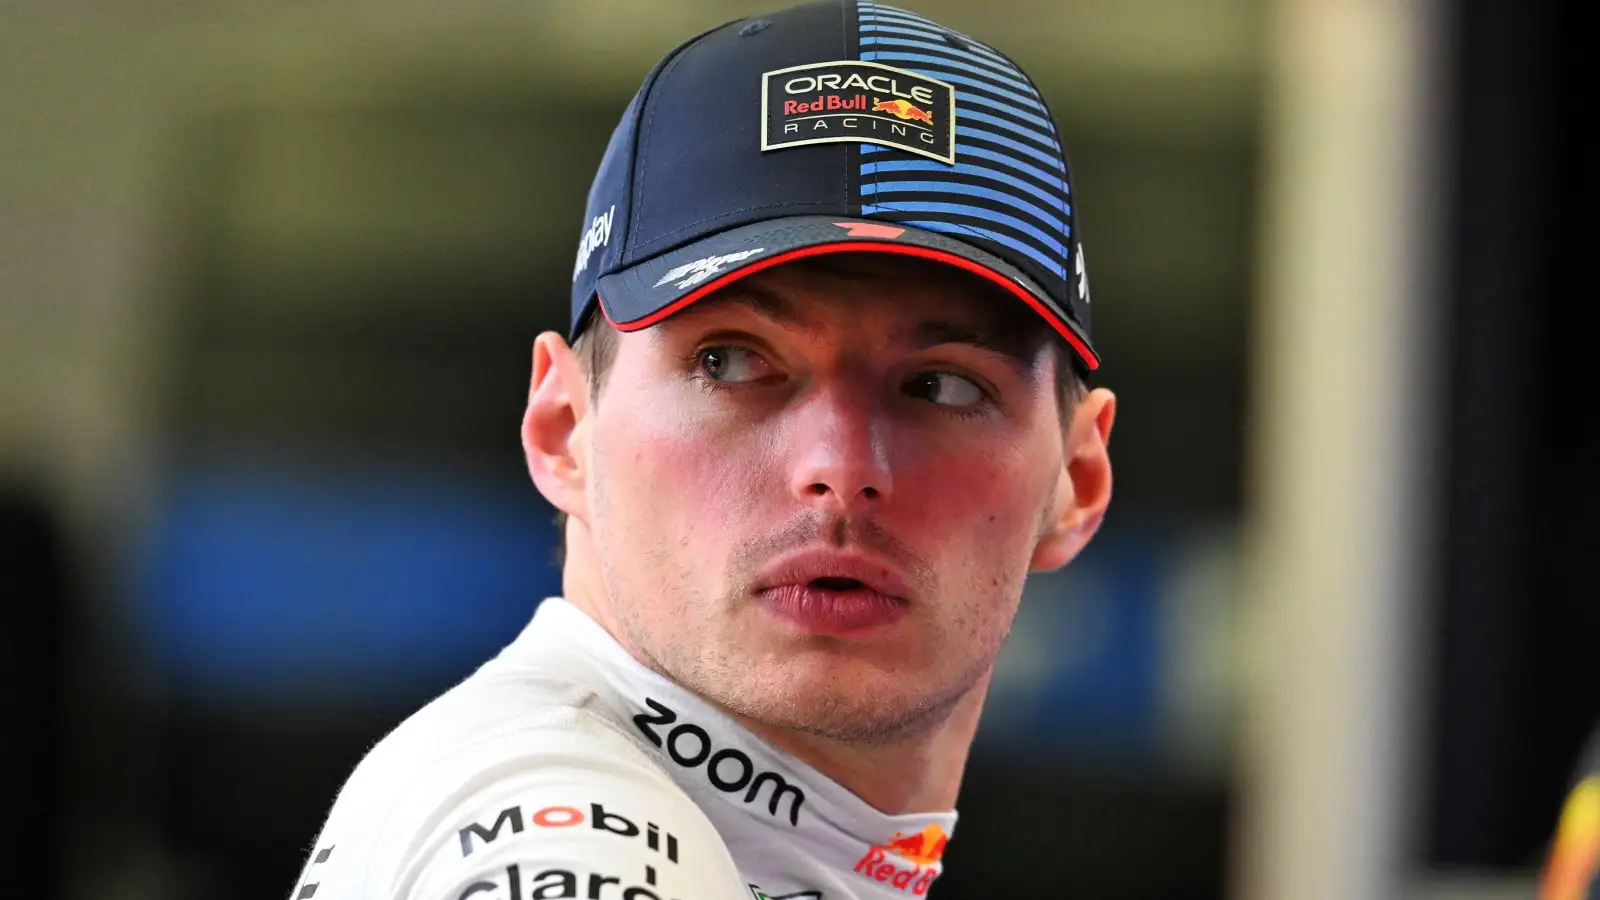 Verstappen Sets Pace Ahead of Perez in Japanese Grand Prix Warm-Up